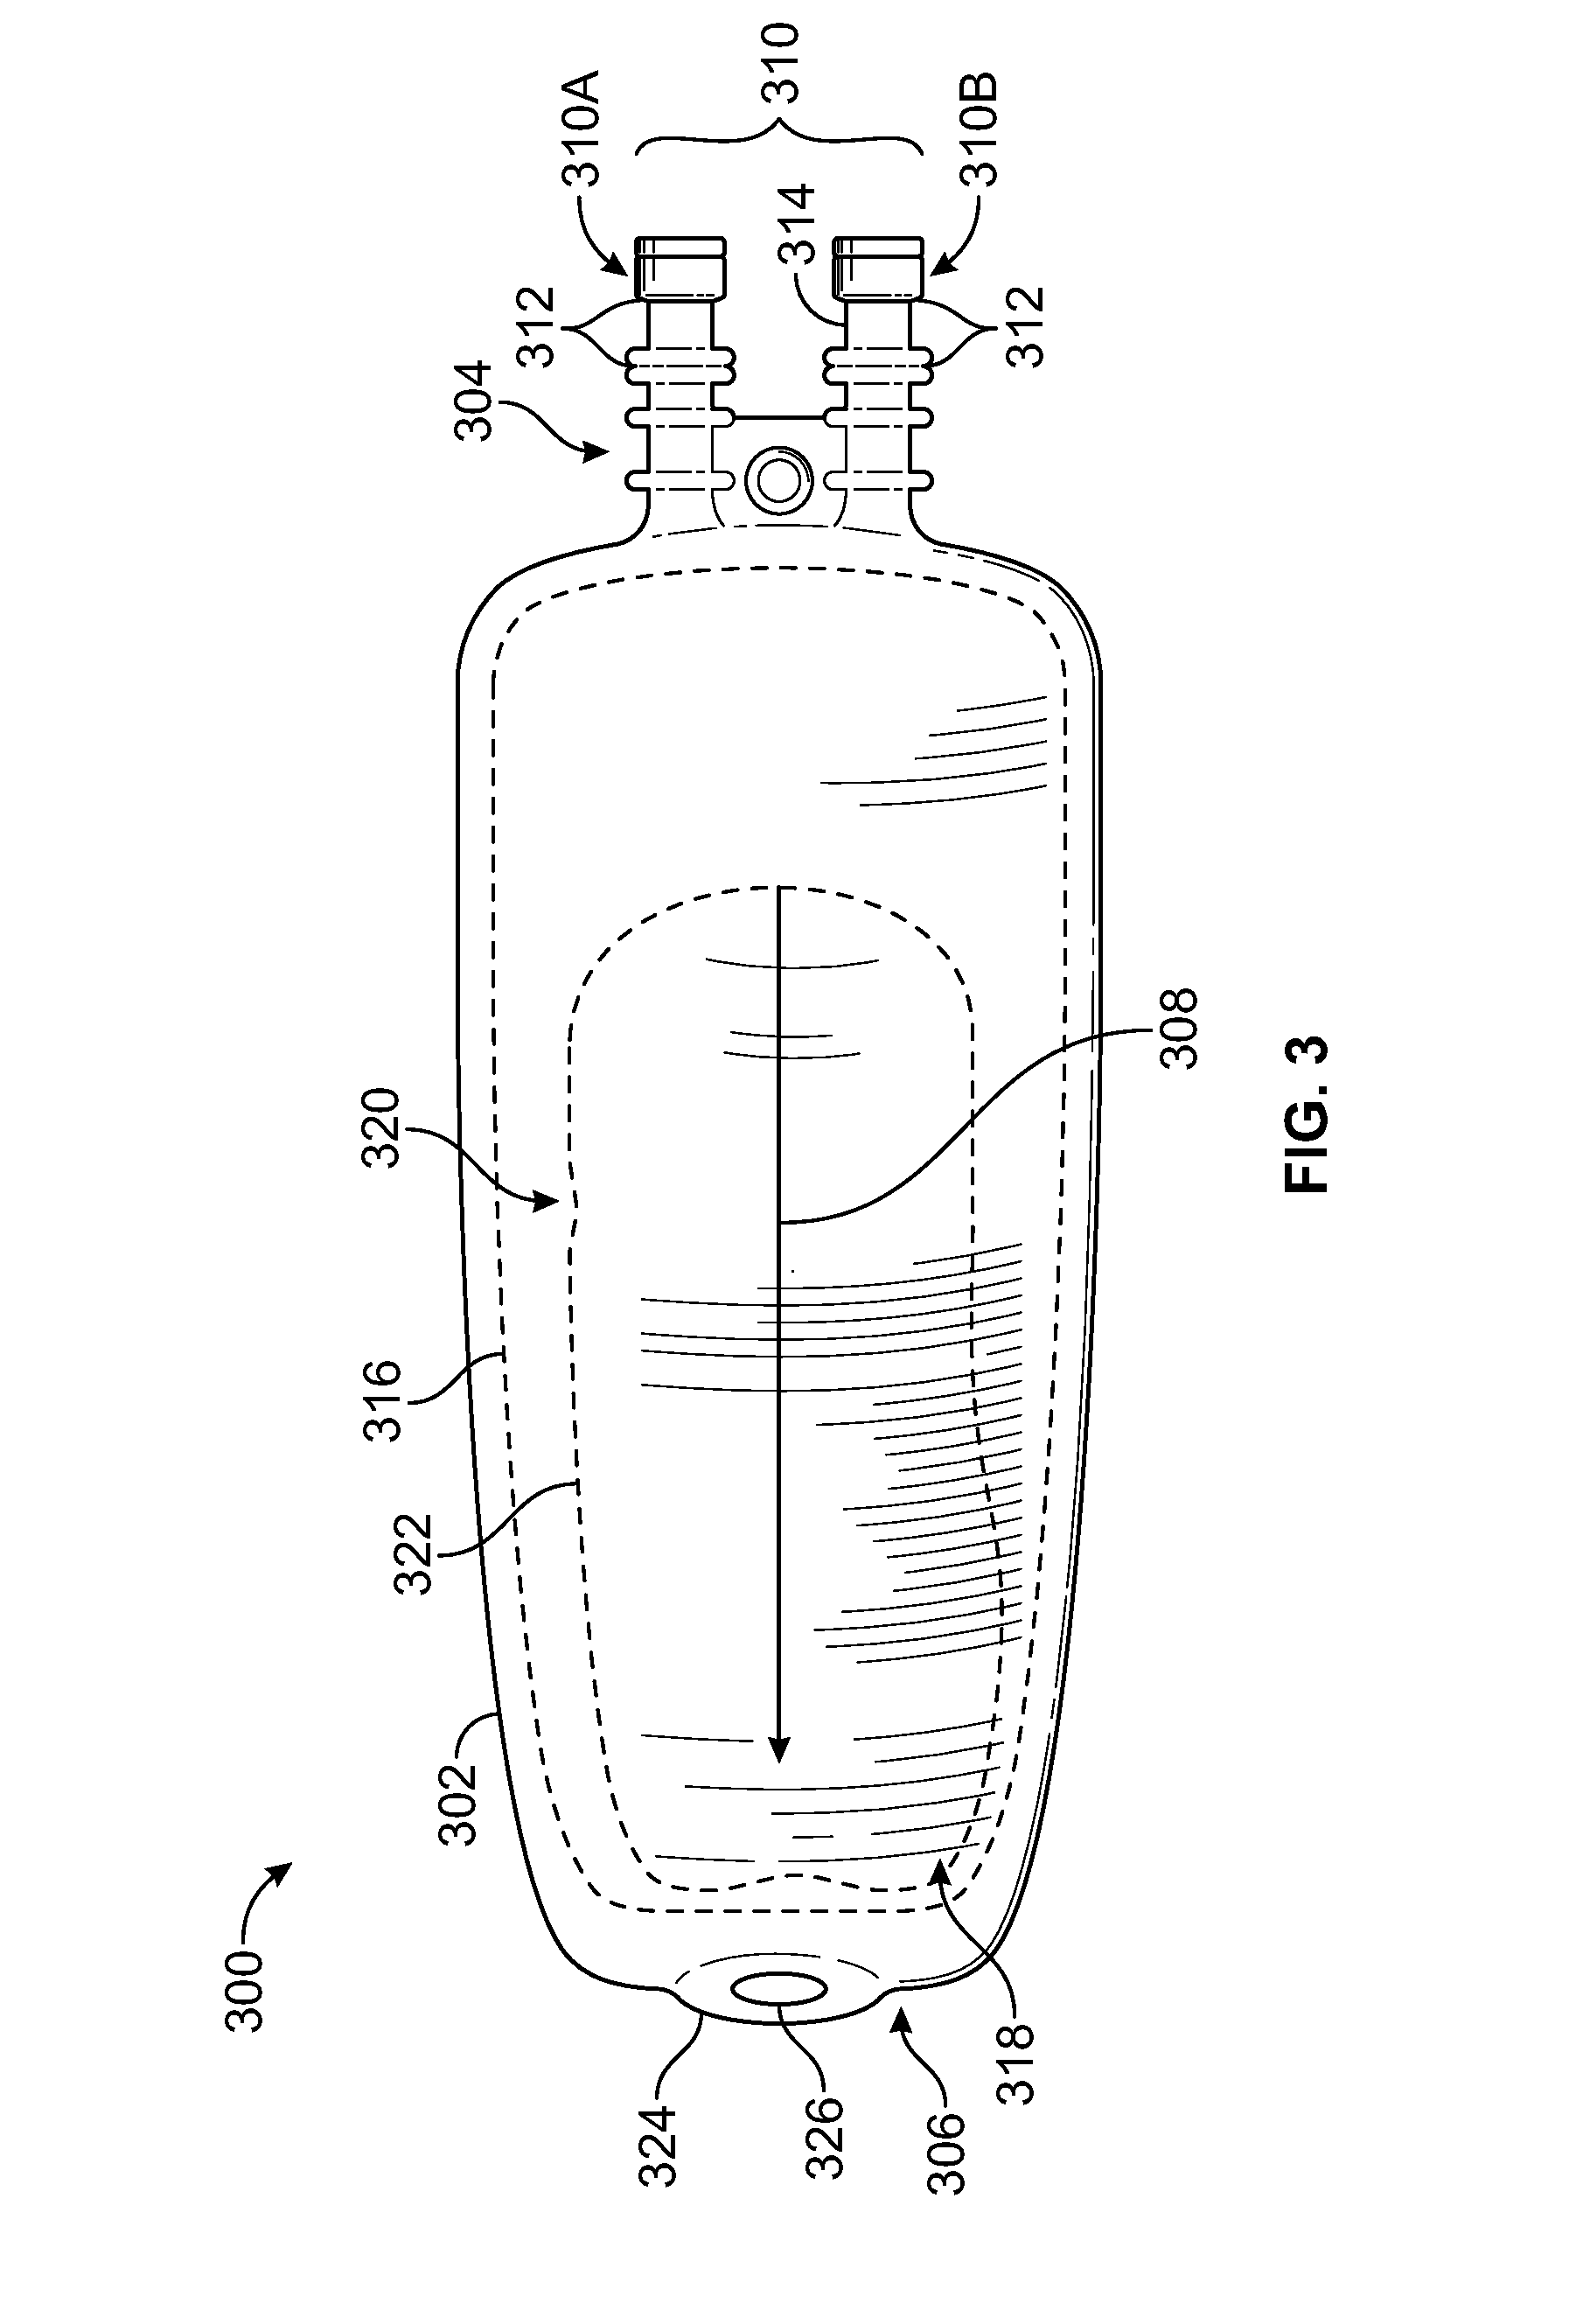 System and method for printing on a flexible body